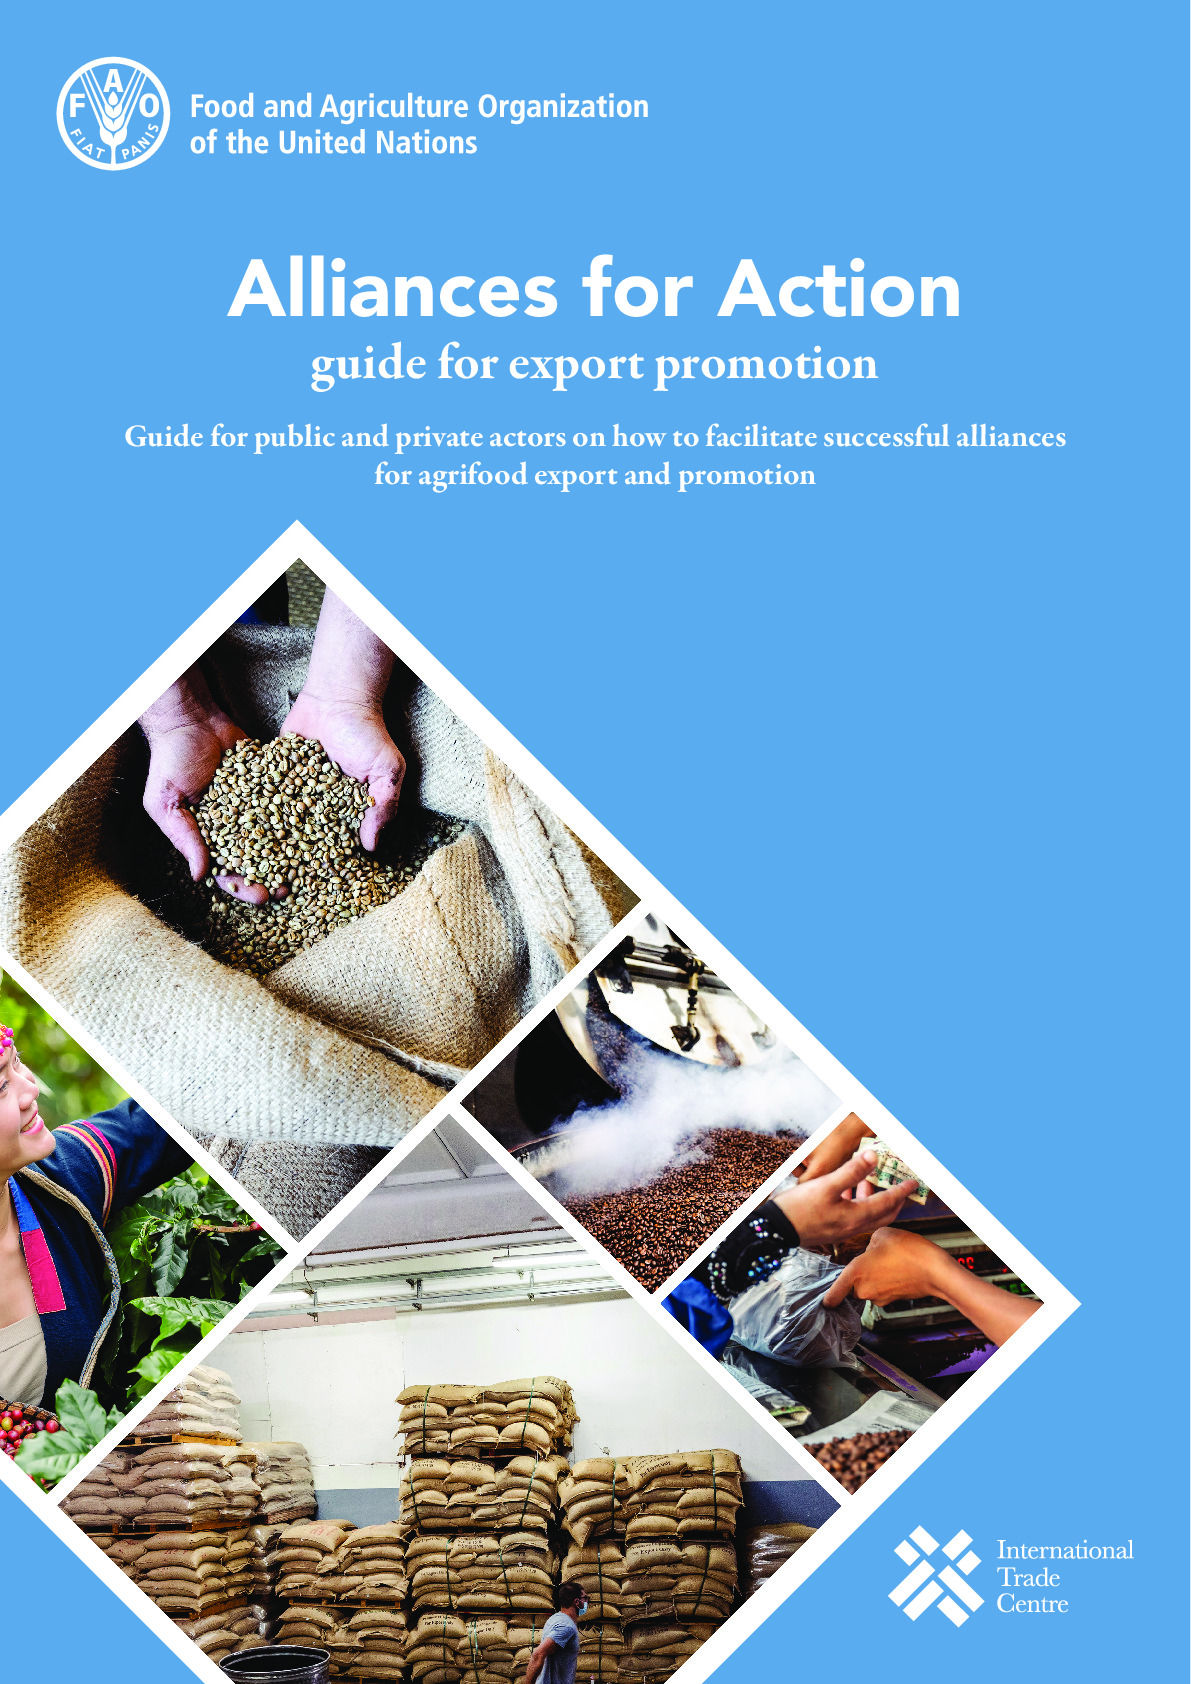 alliances_for_action_guide_for_export_promotion